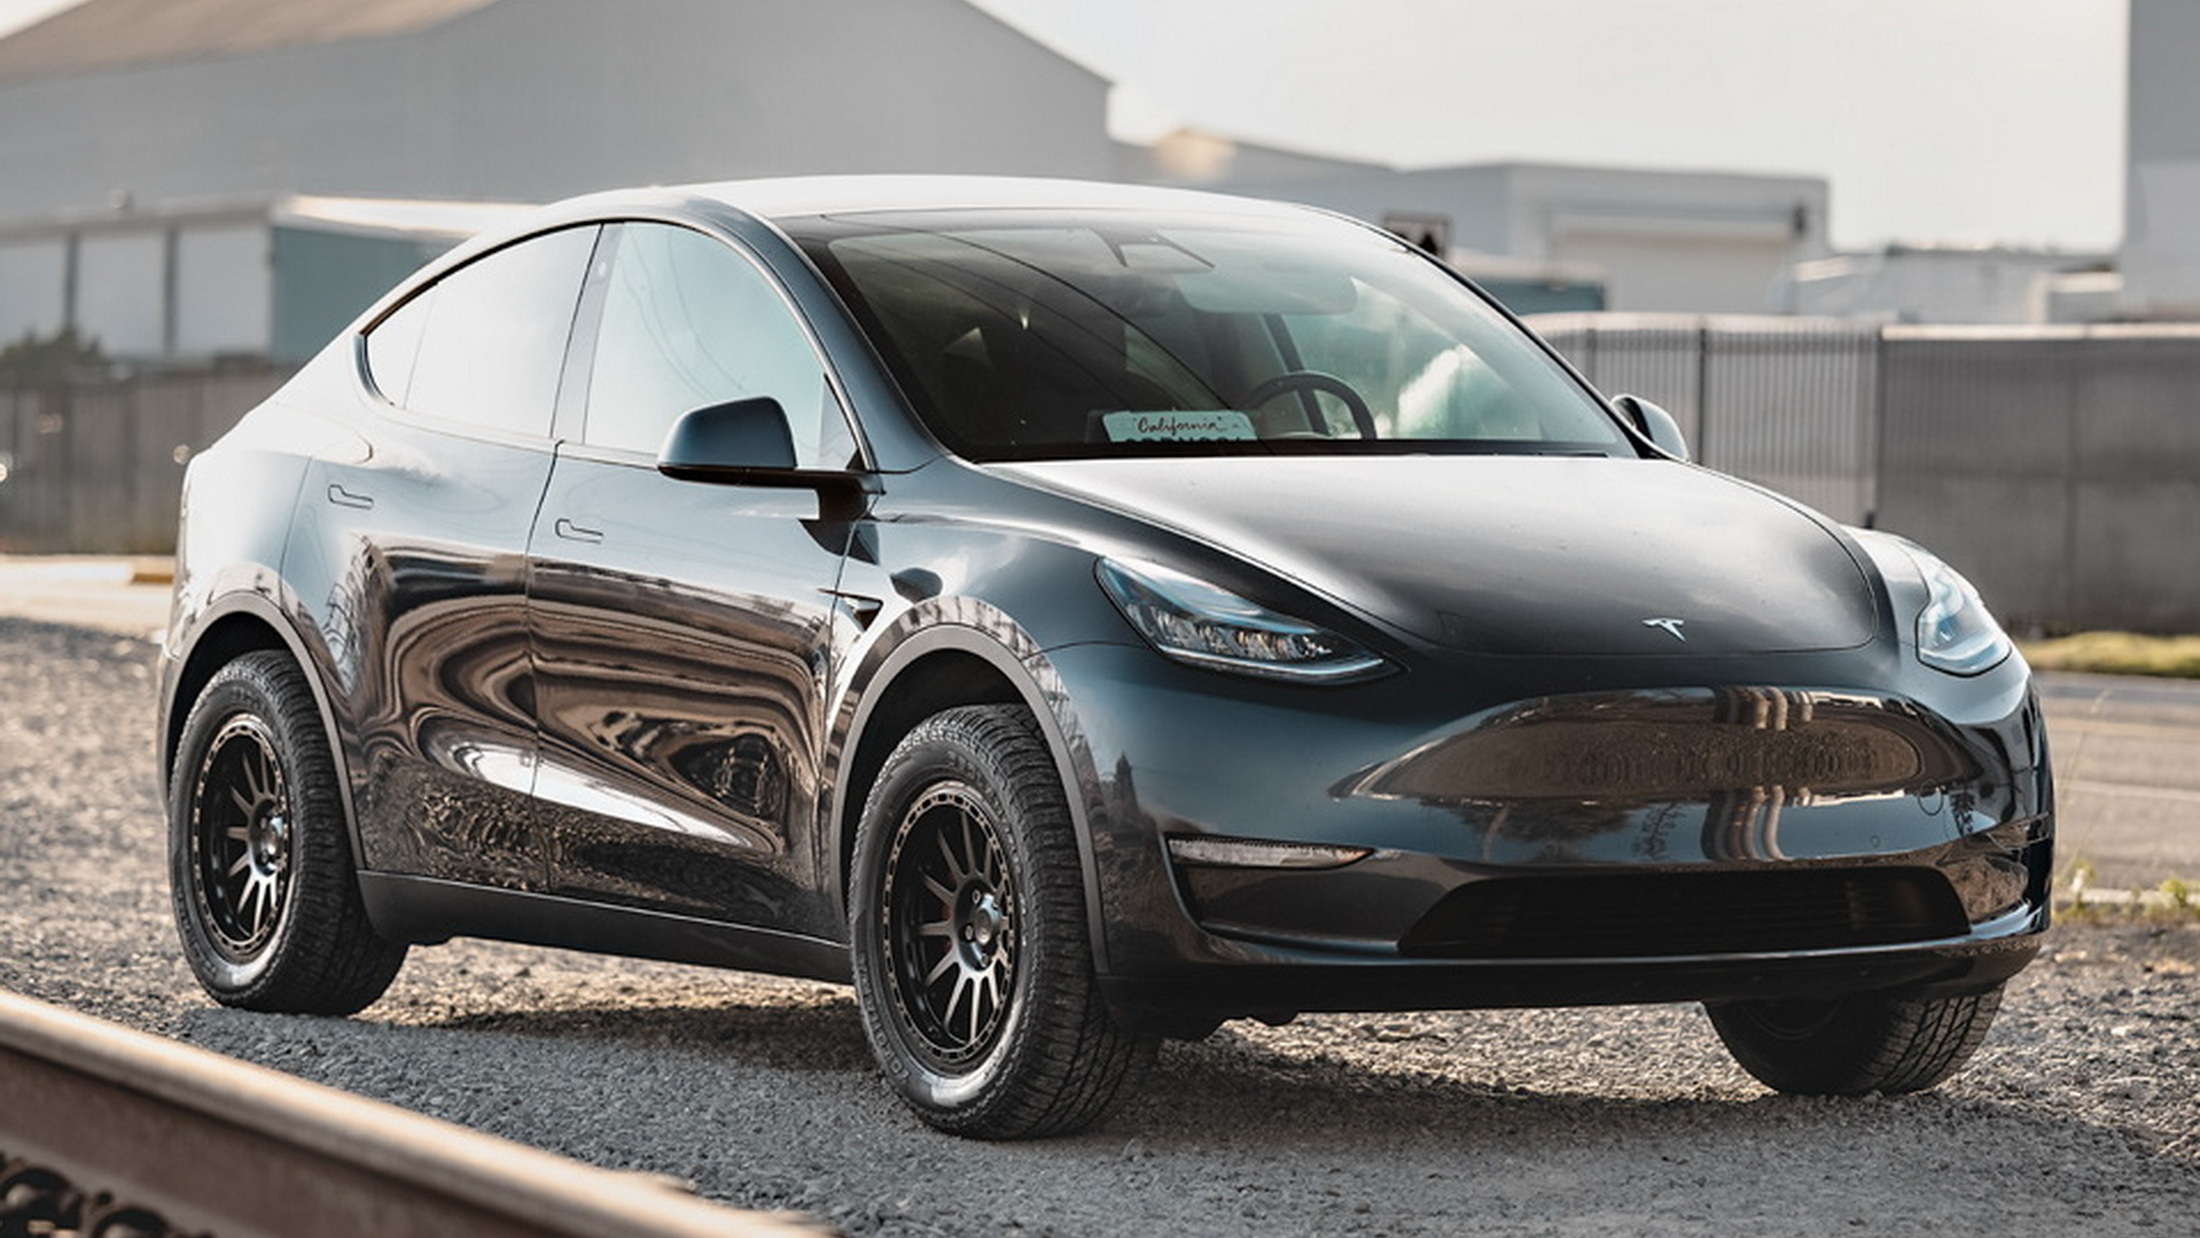 Efficiency for the Win: Tesla's Model Y is our EV of the Month